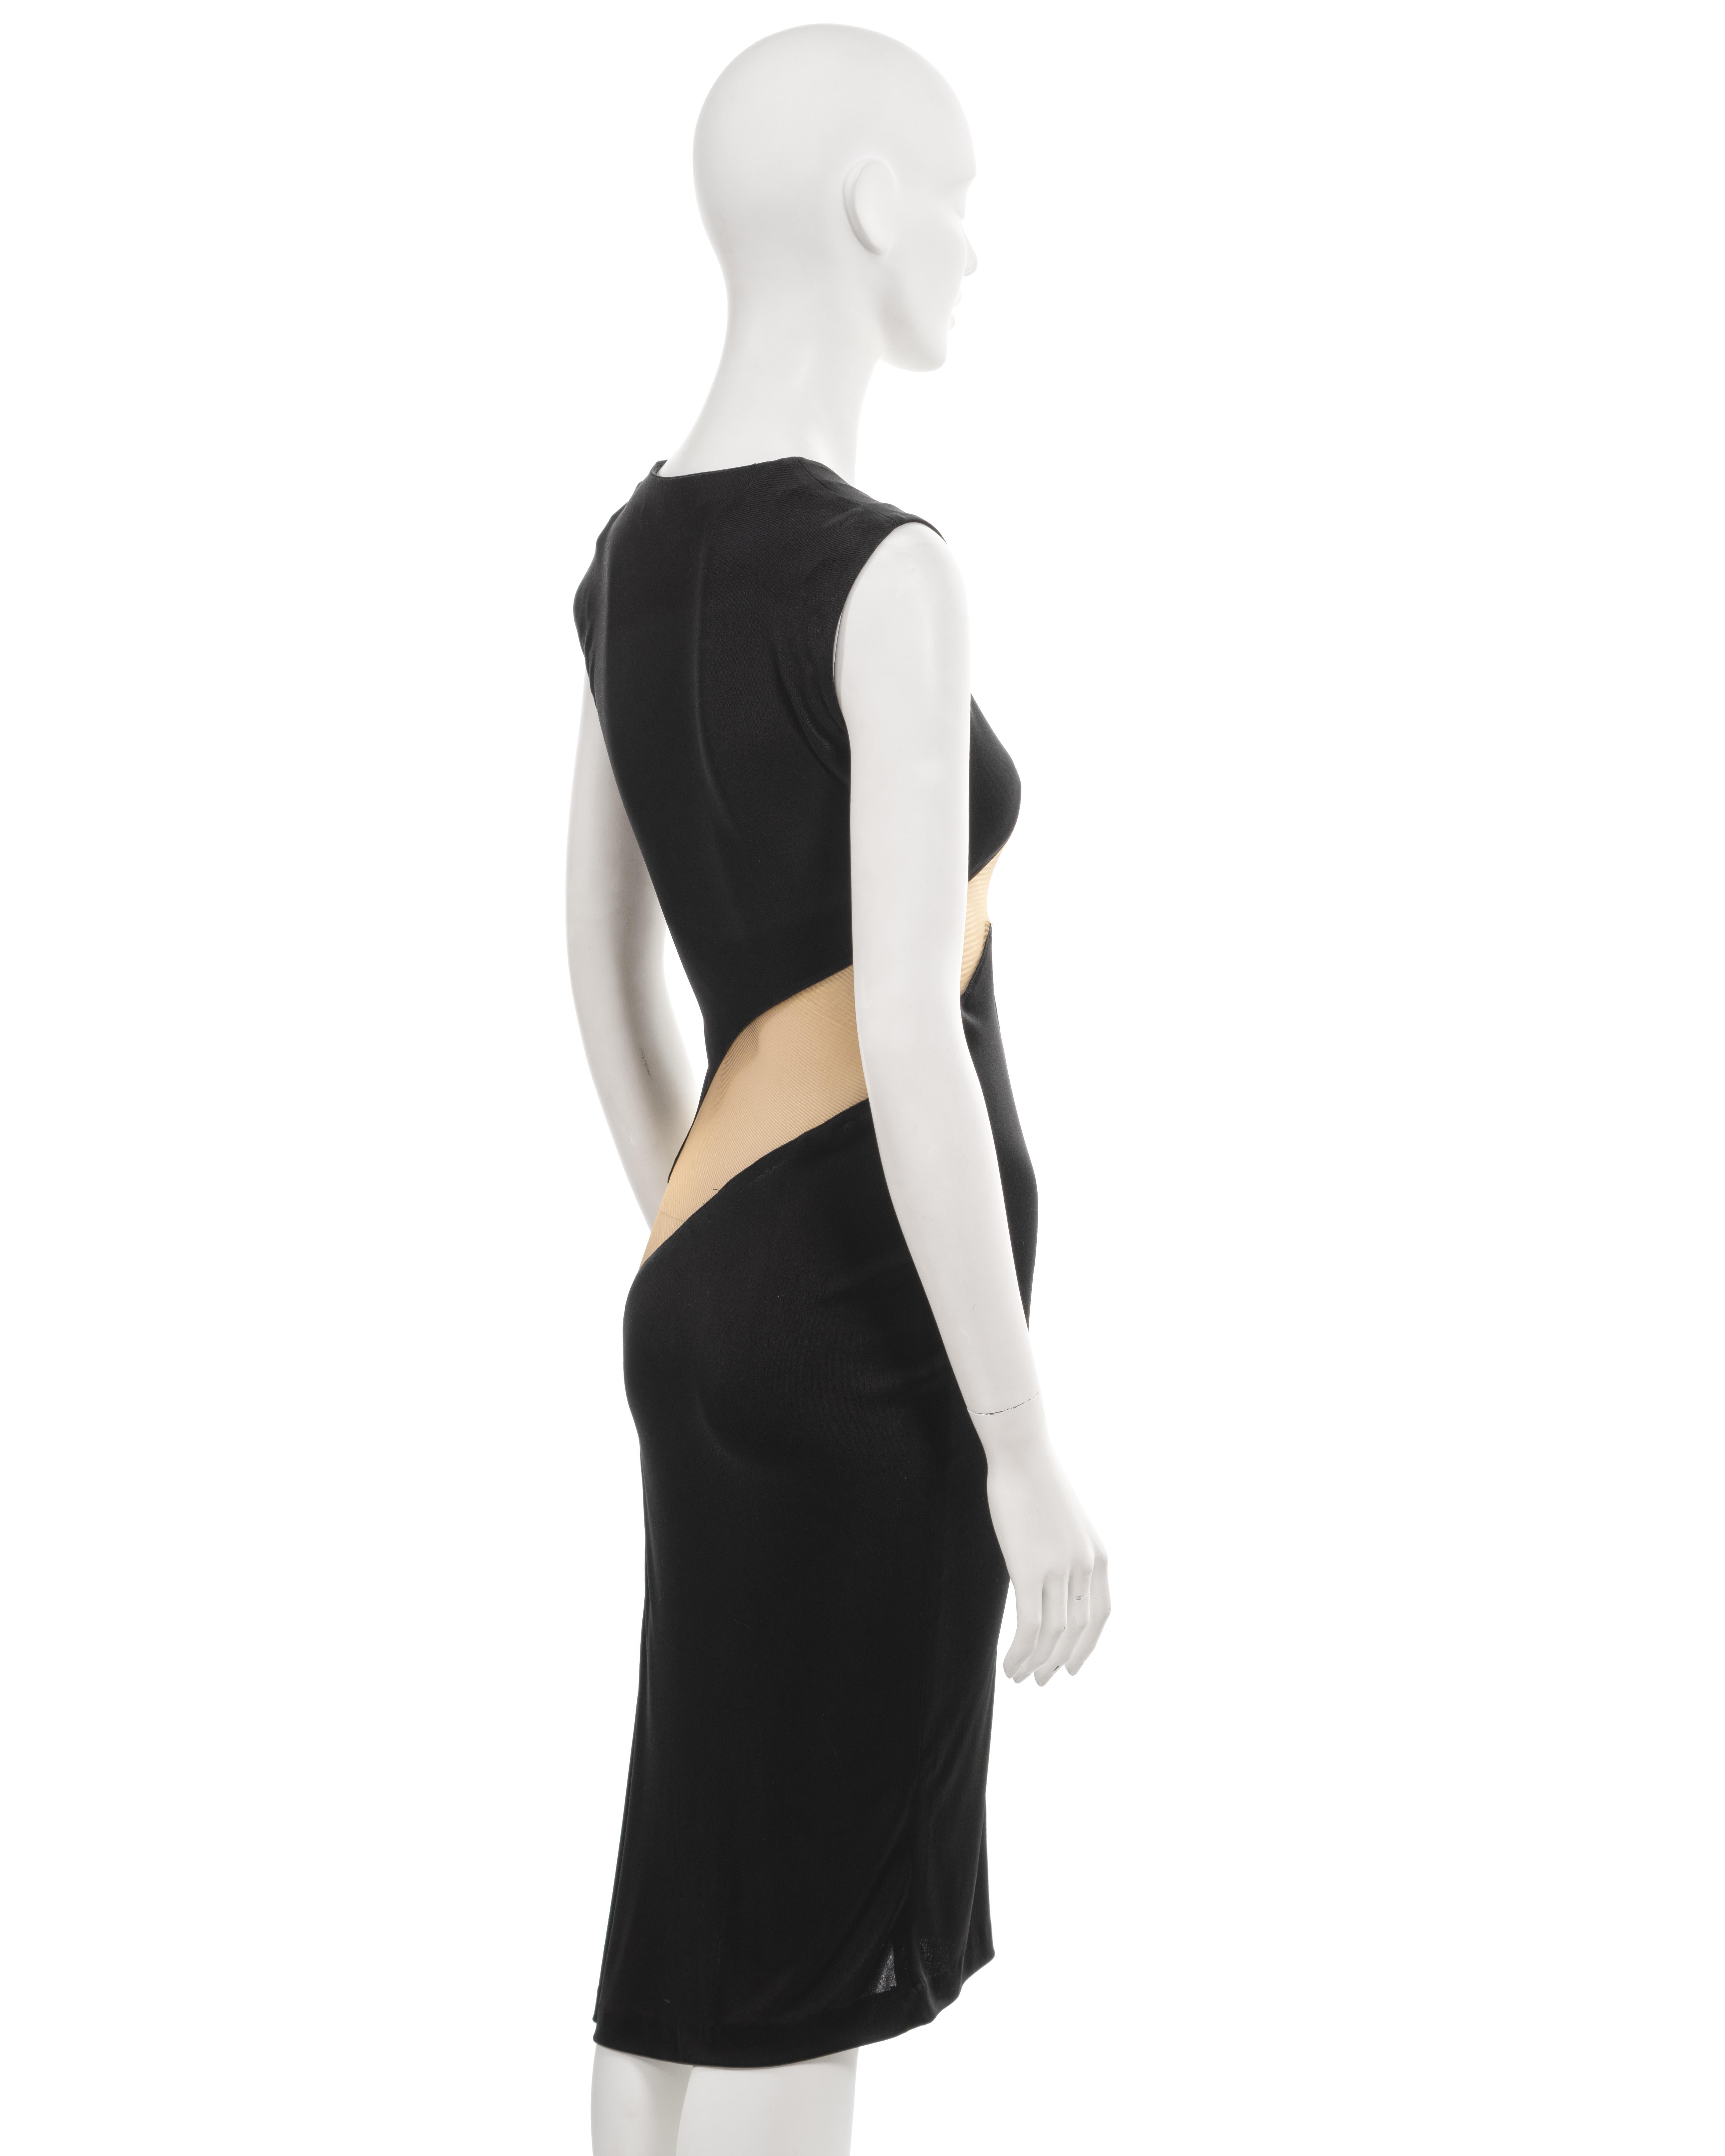 Alexander McQueen black acetate jersey dress with nude mesh insert, ss 1996 For Sale 3